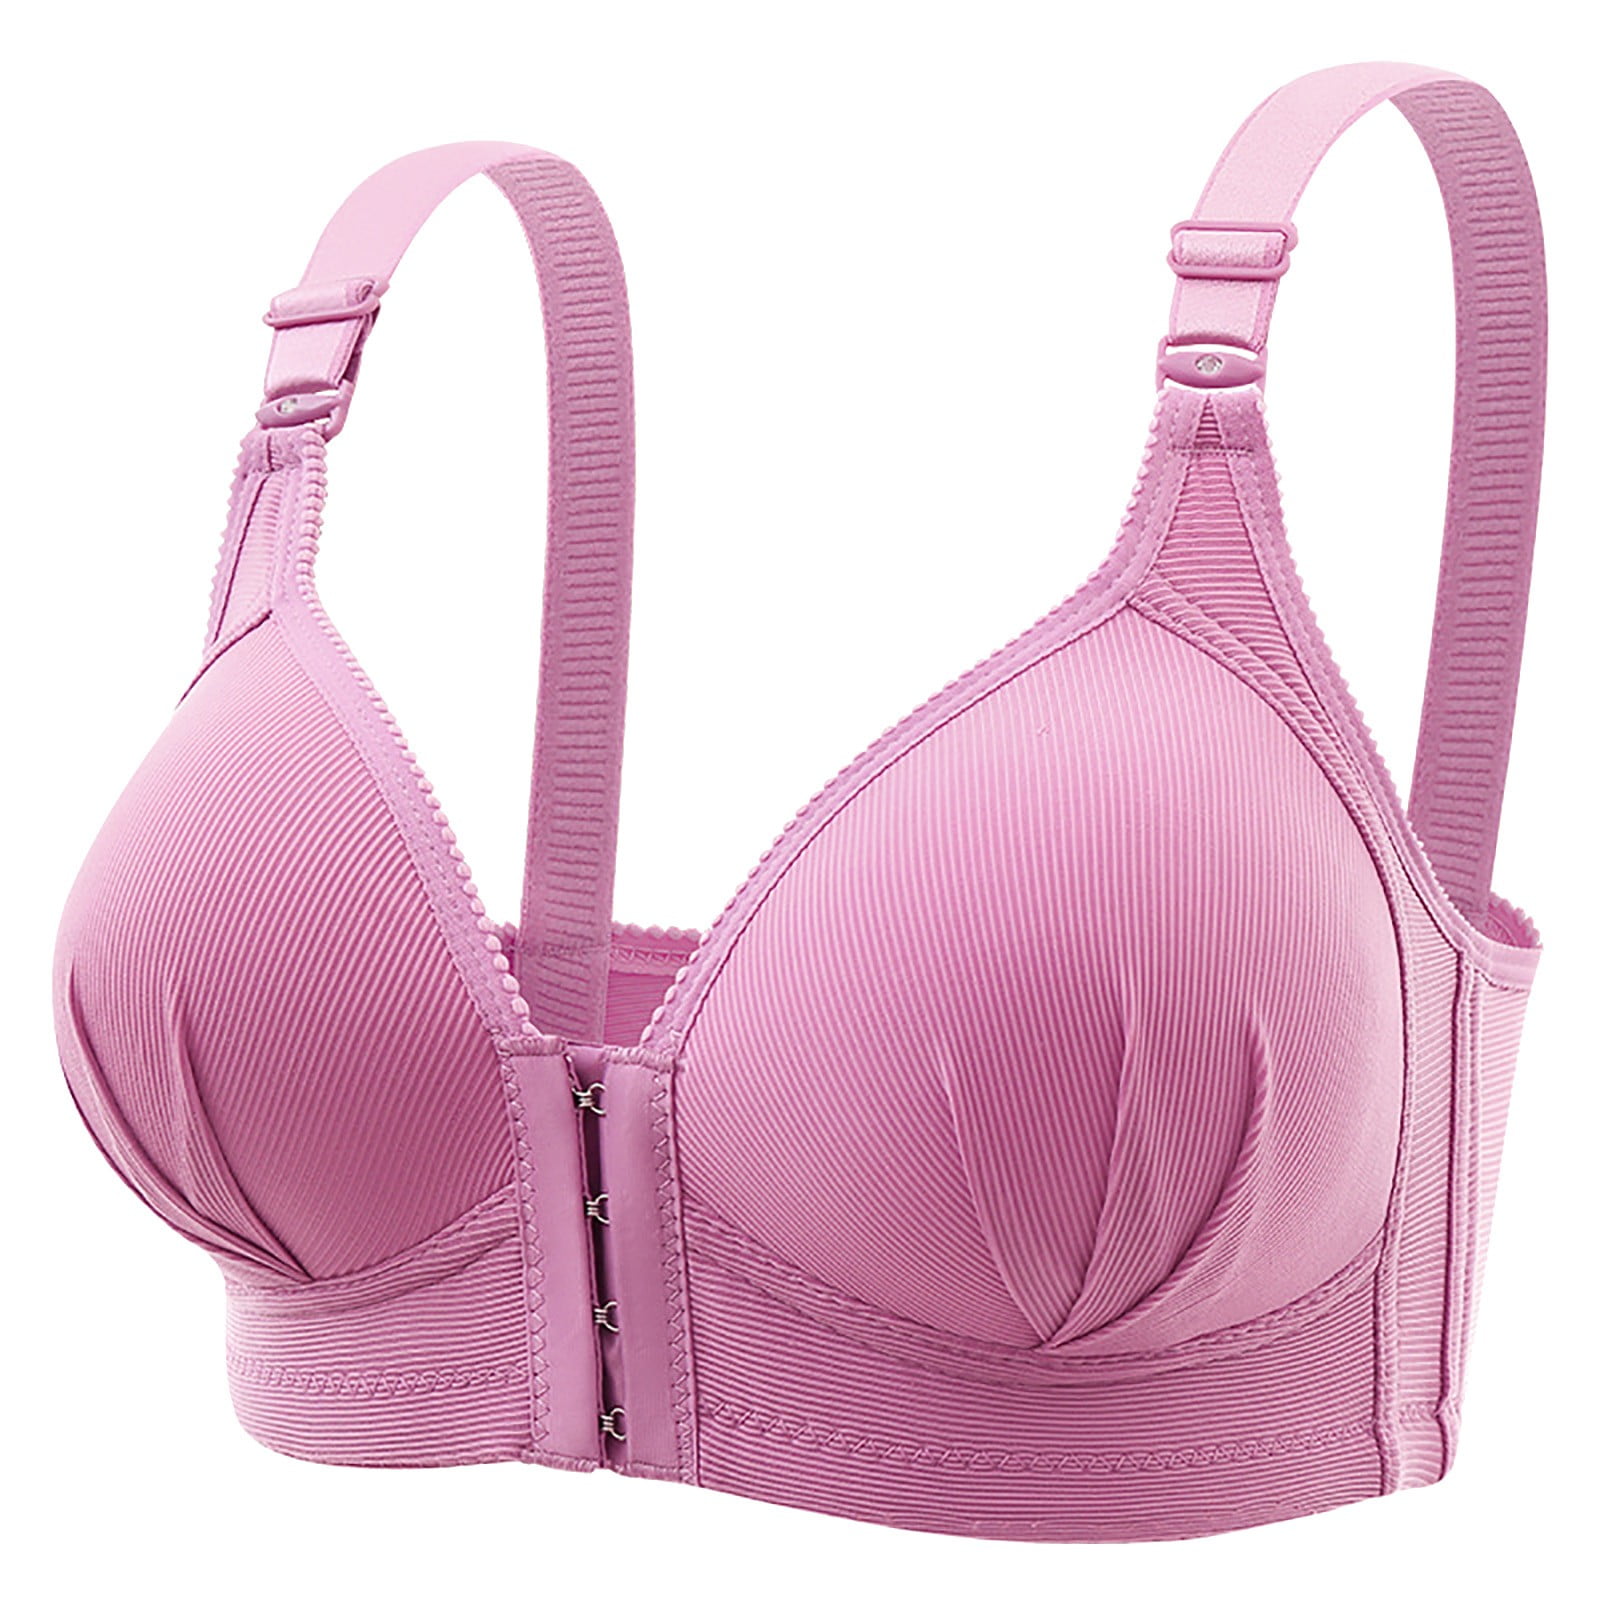 adviicd She Fit Sports Bras One Smooth U Underwire Bra, Smoothing